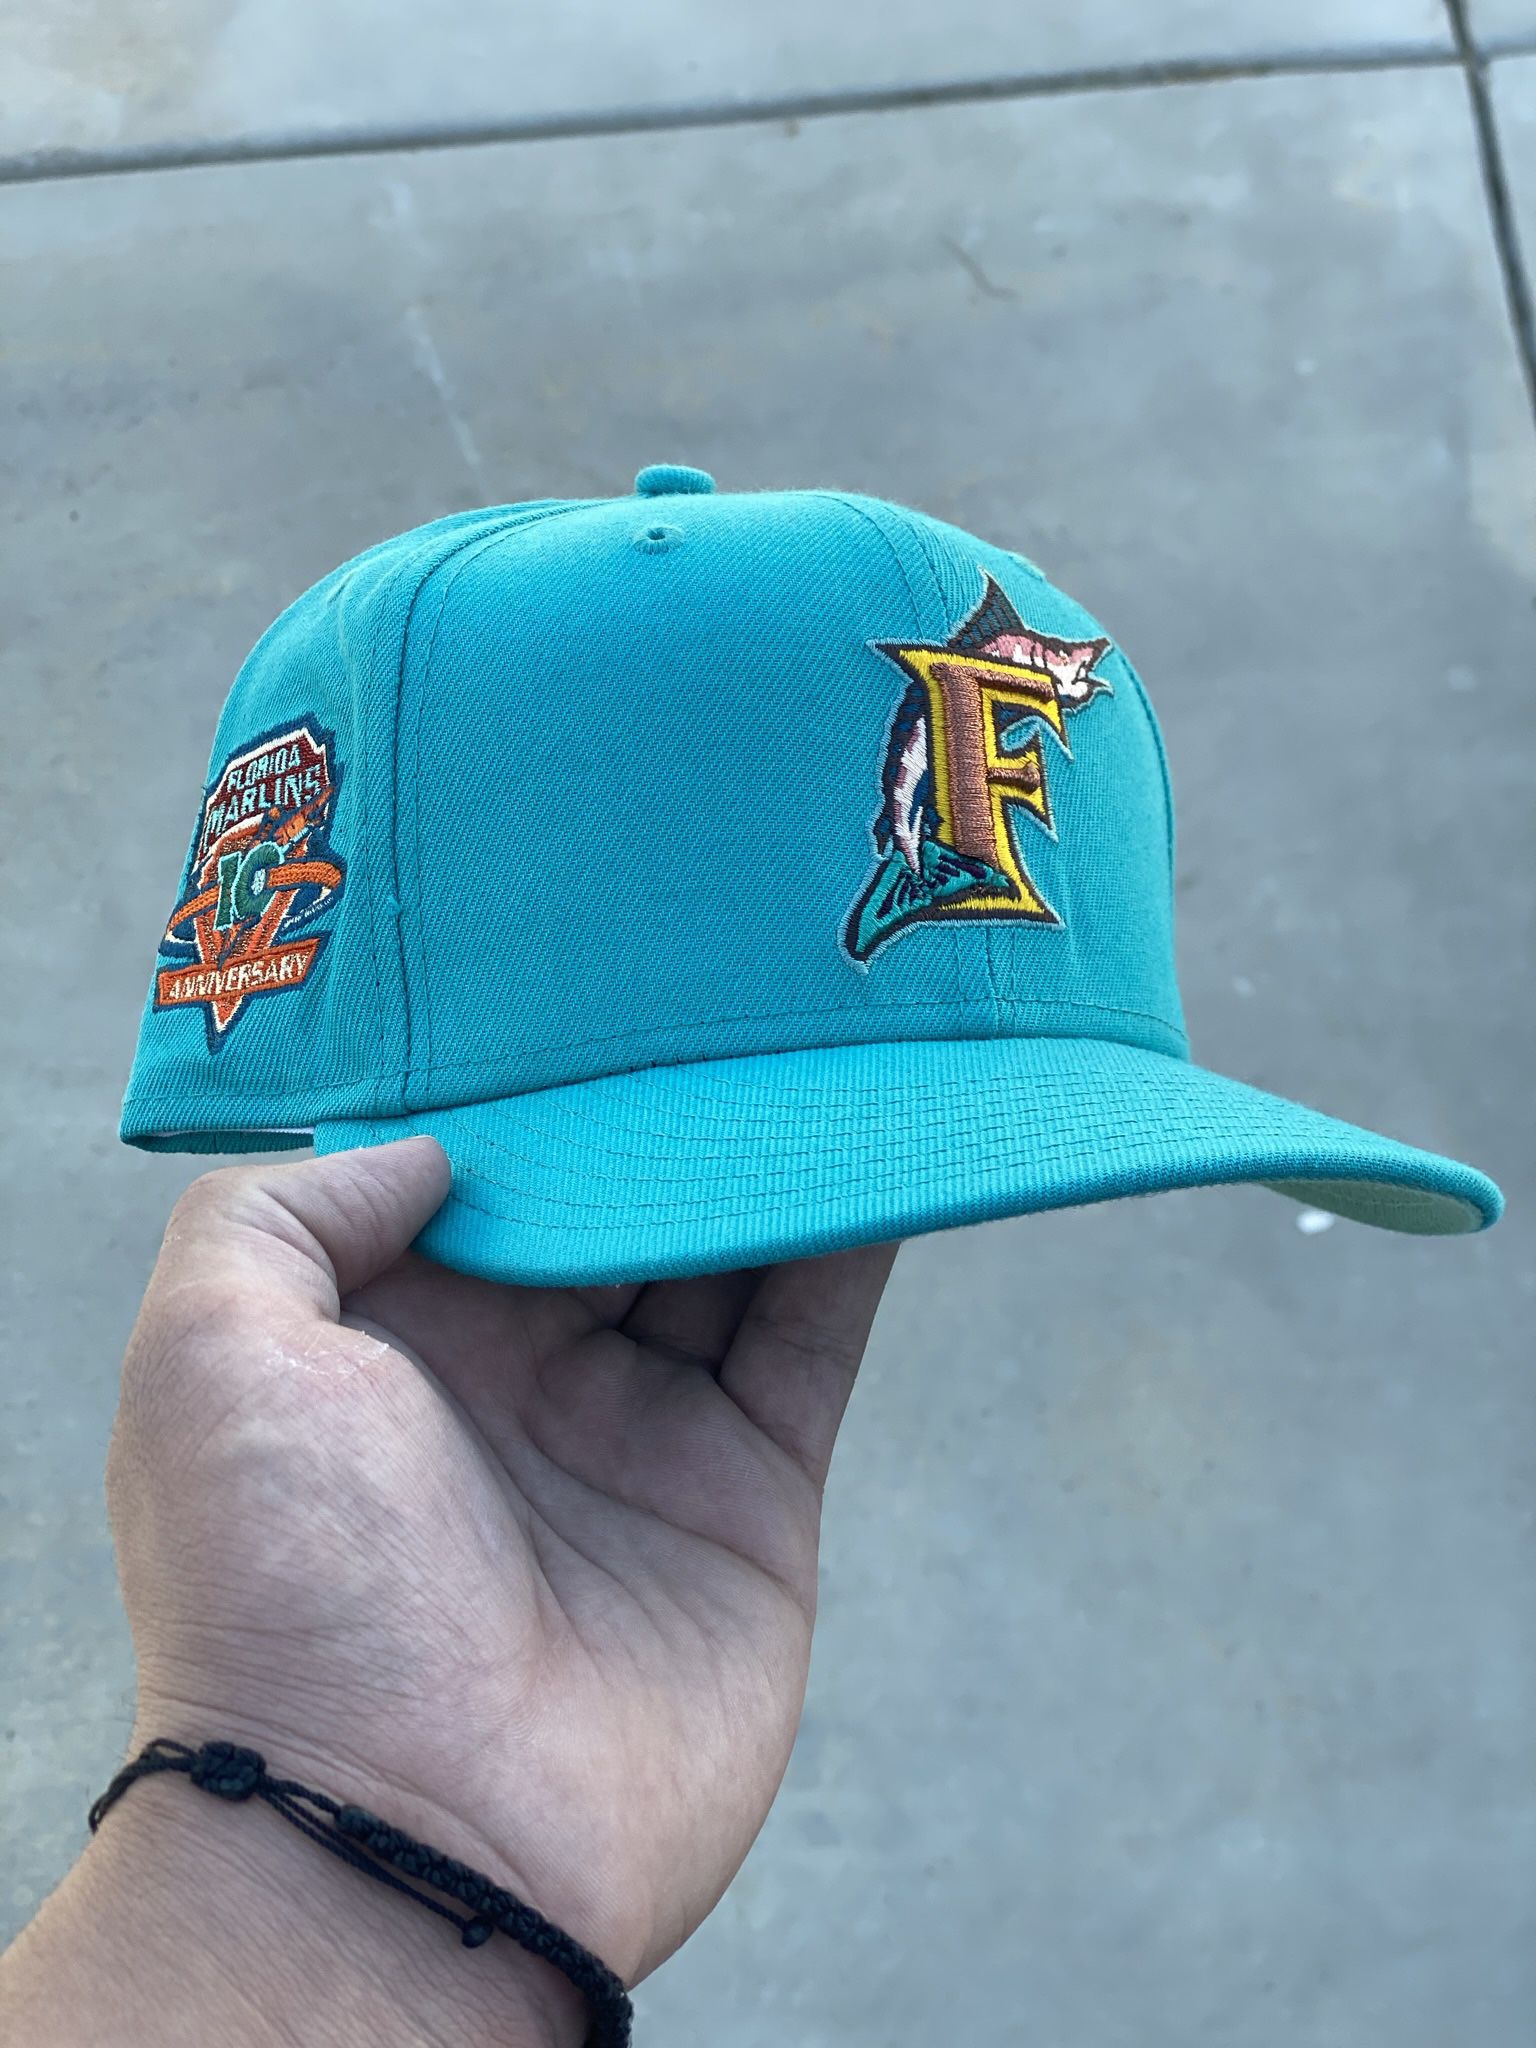 Florida Marlins “ Harry Potter” From My Fitteds 